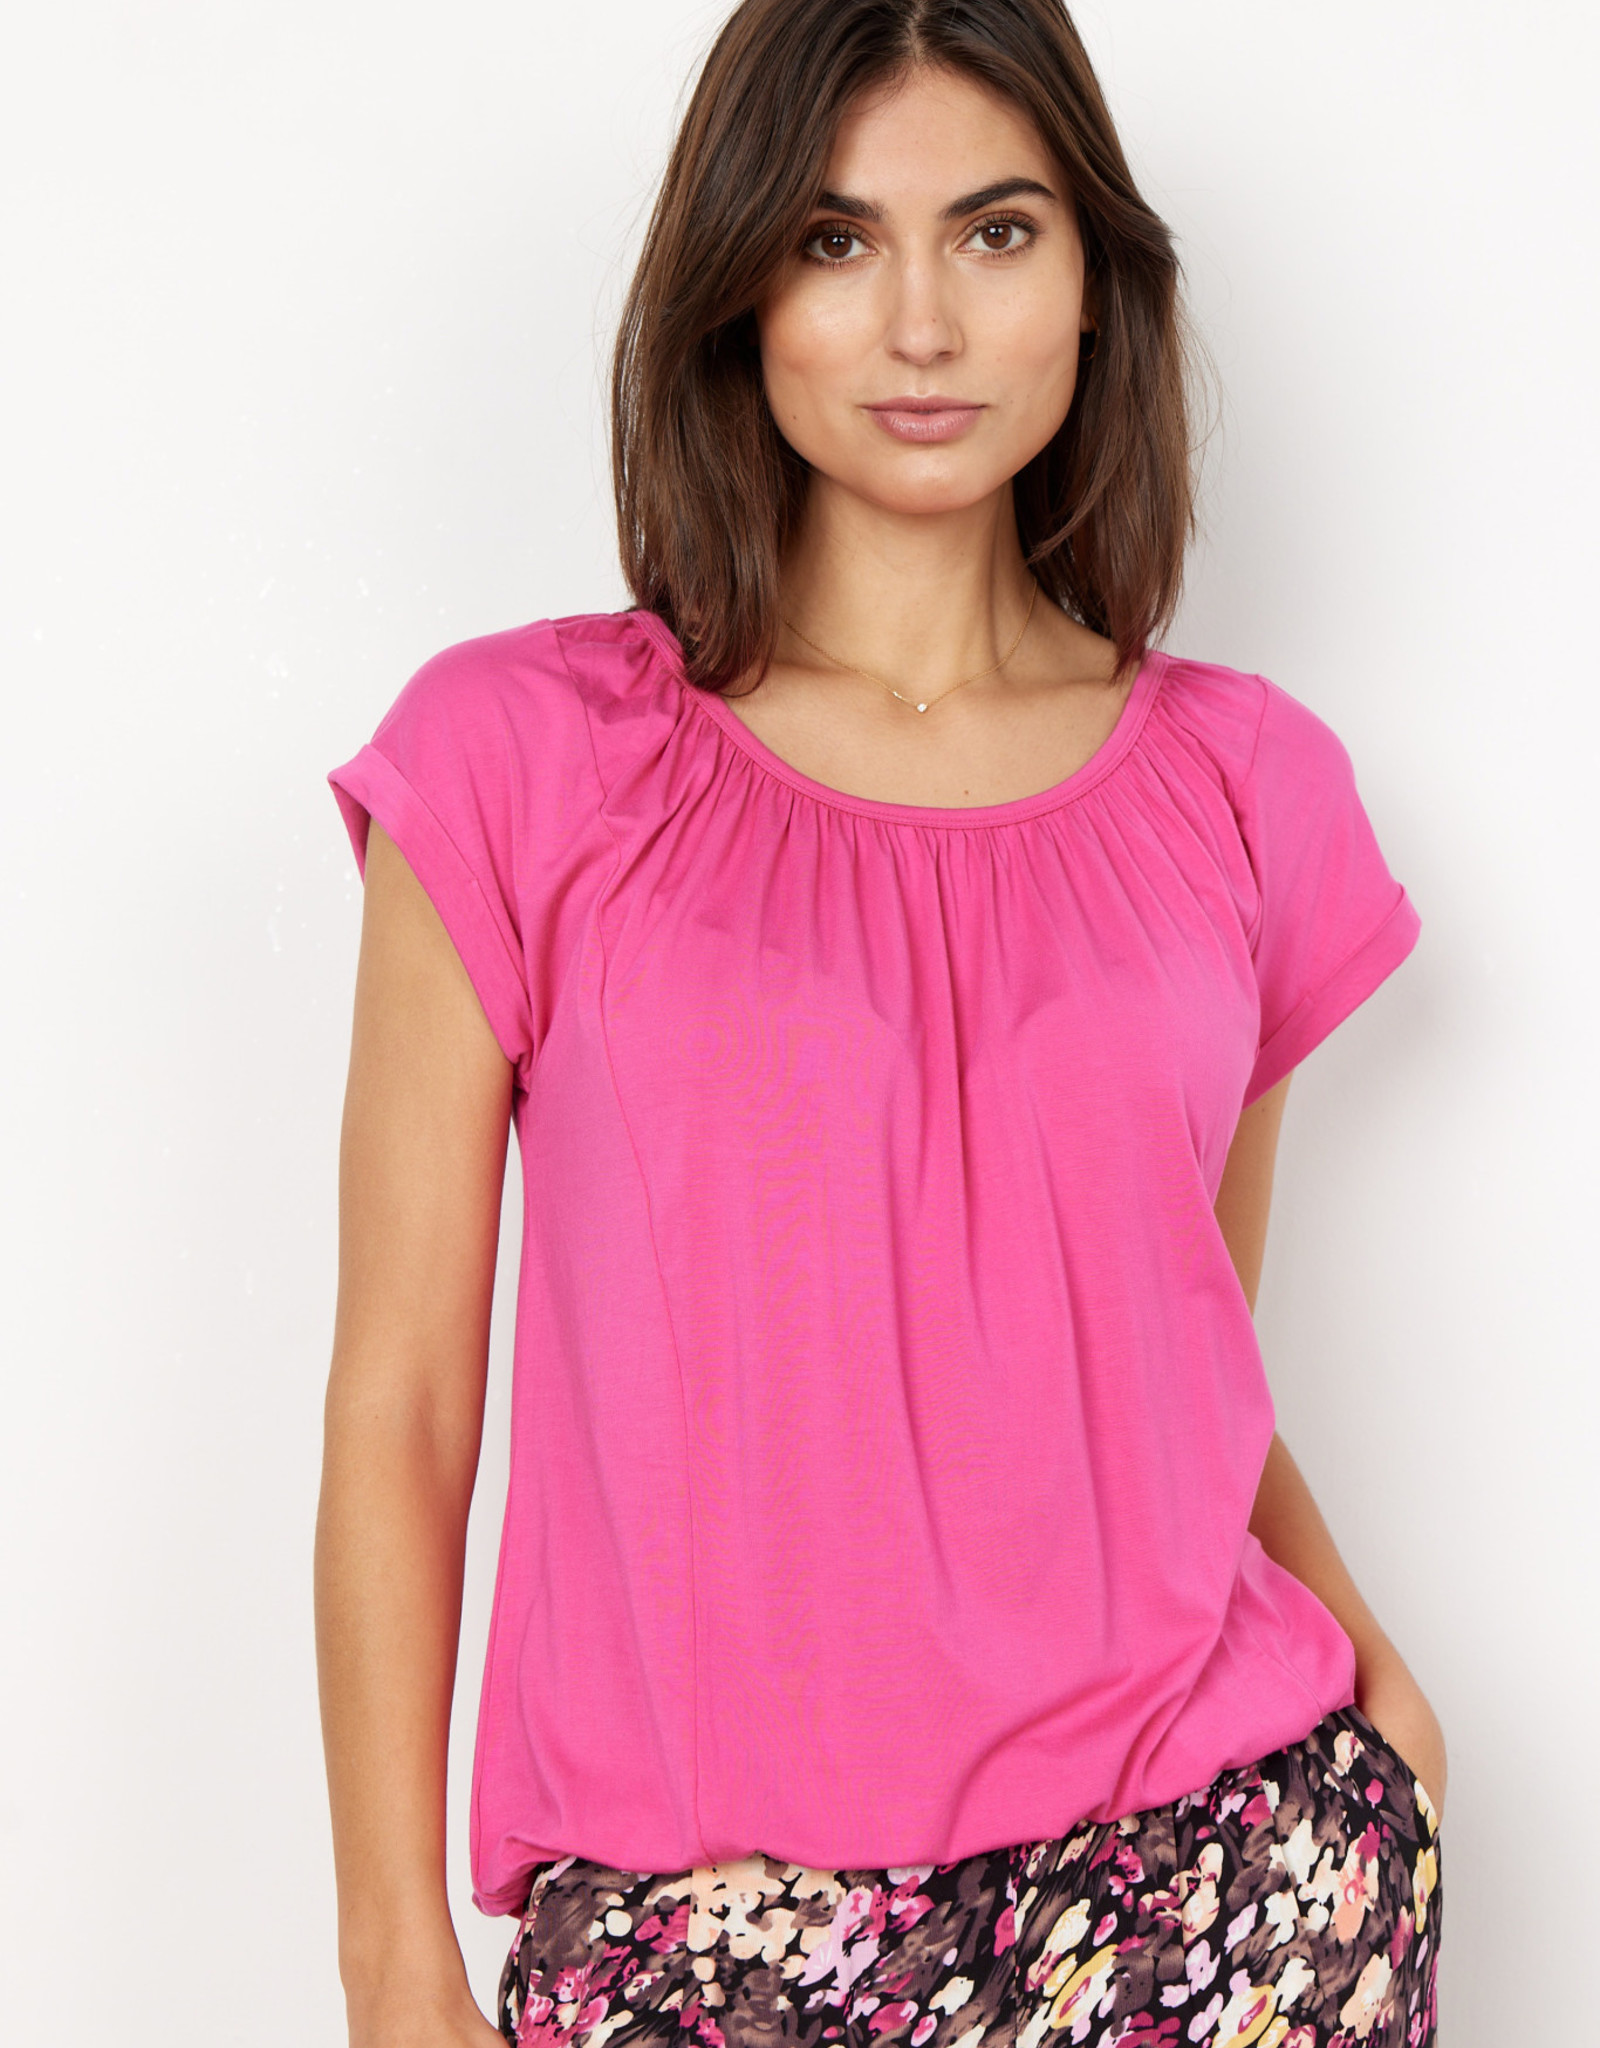 Soya Concept Soya Concept Marica 4 Short Sleeve Round Neck Top